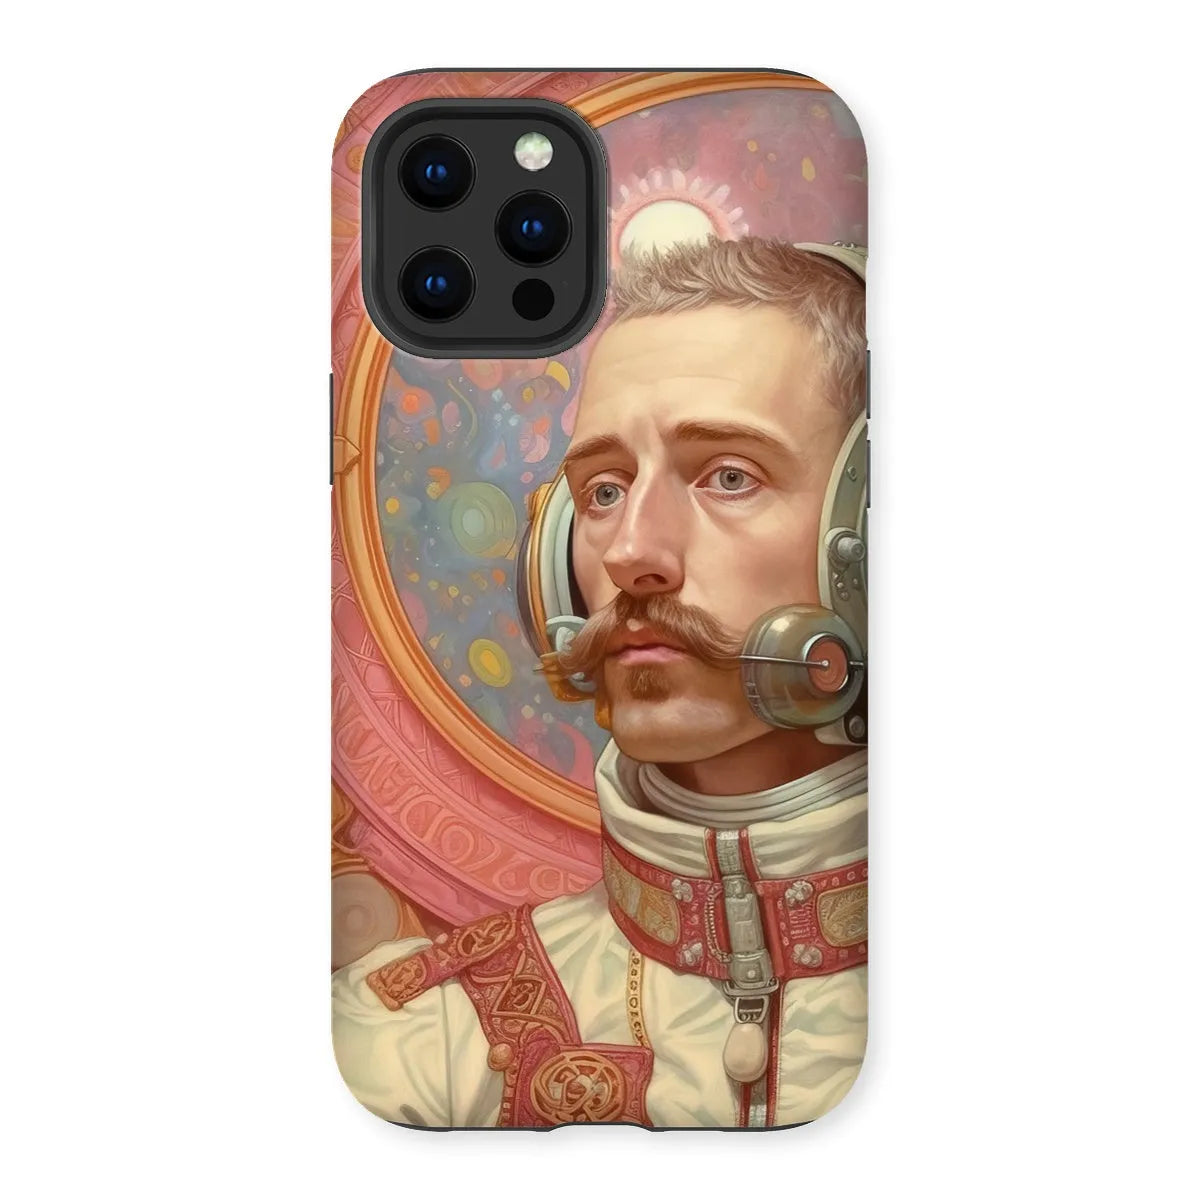 Axel The Gay Astronaut - Gay Aesthetic Art Phone Case - Iphone 13 Pro Max / Matte - Mobile Phone Cases - Aesthetic Art